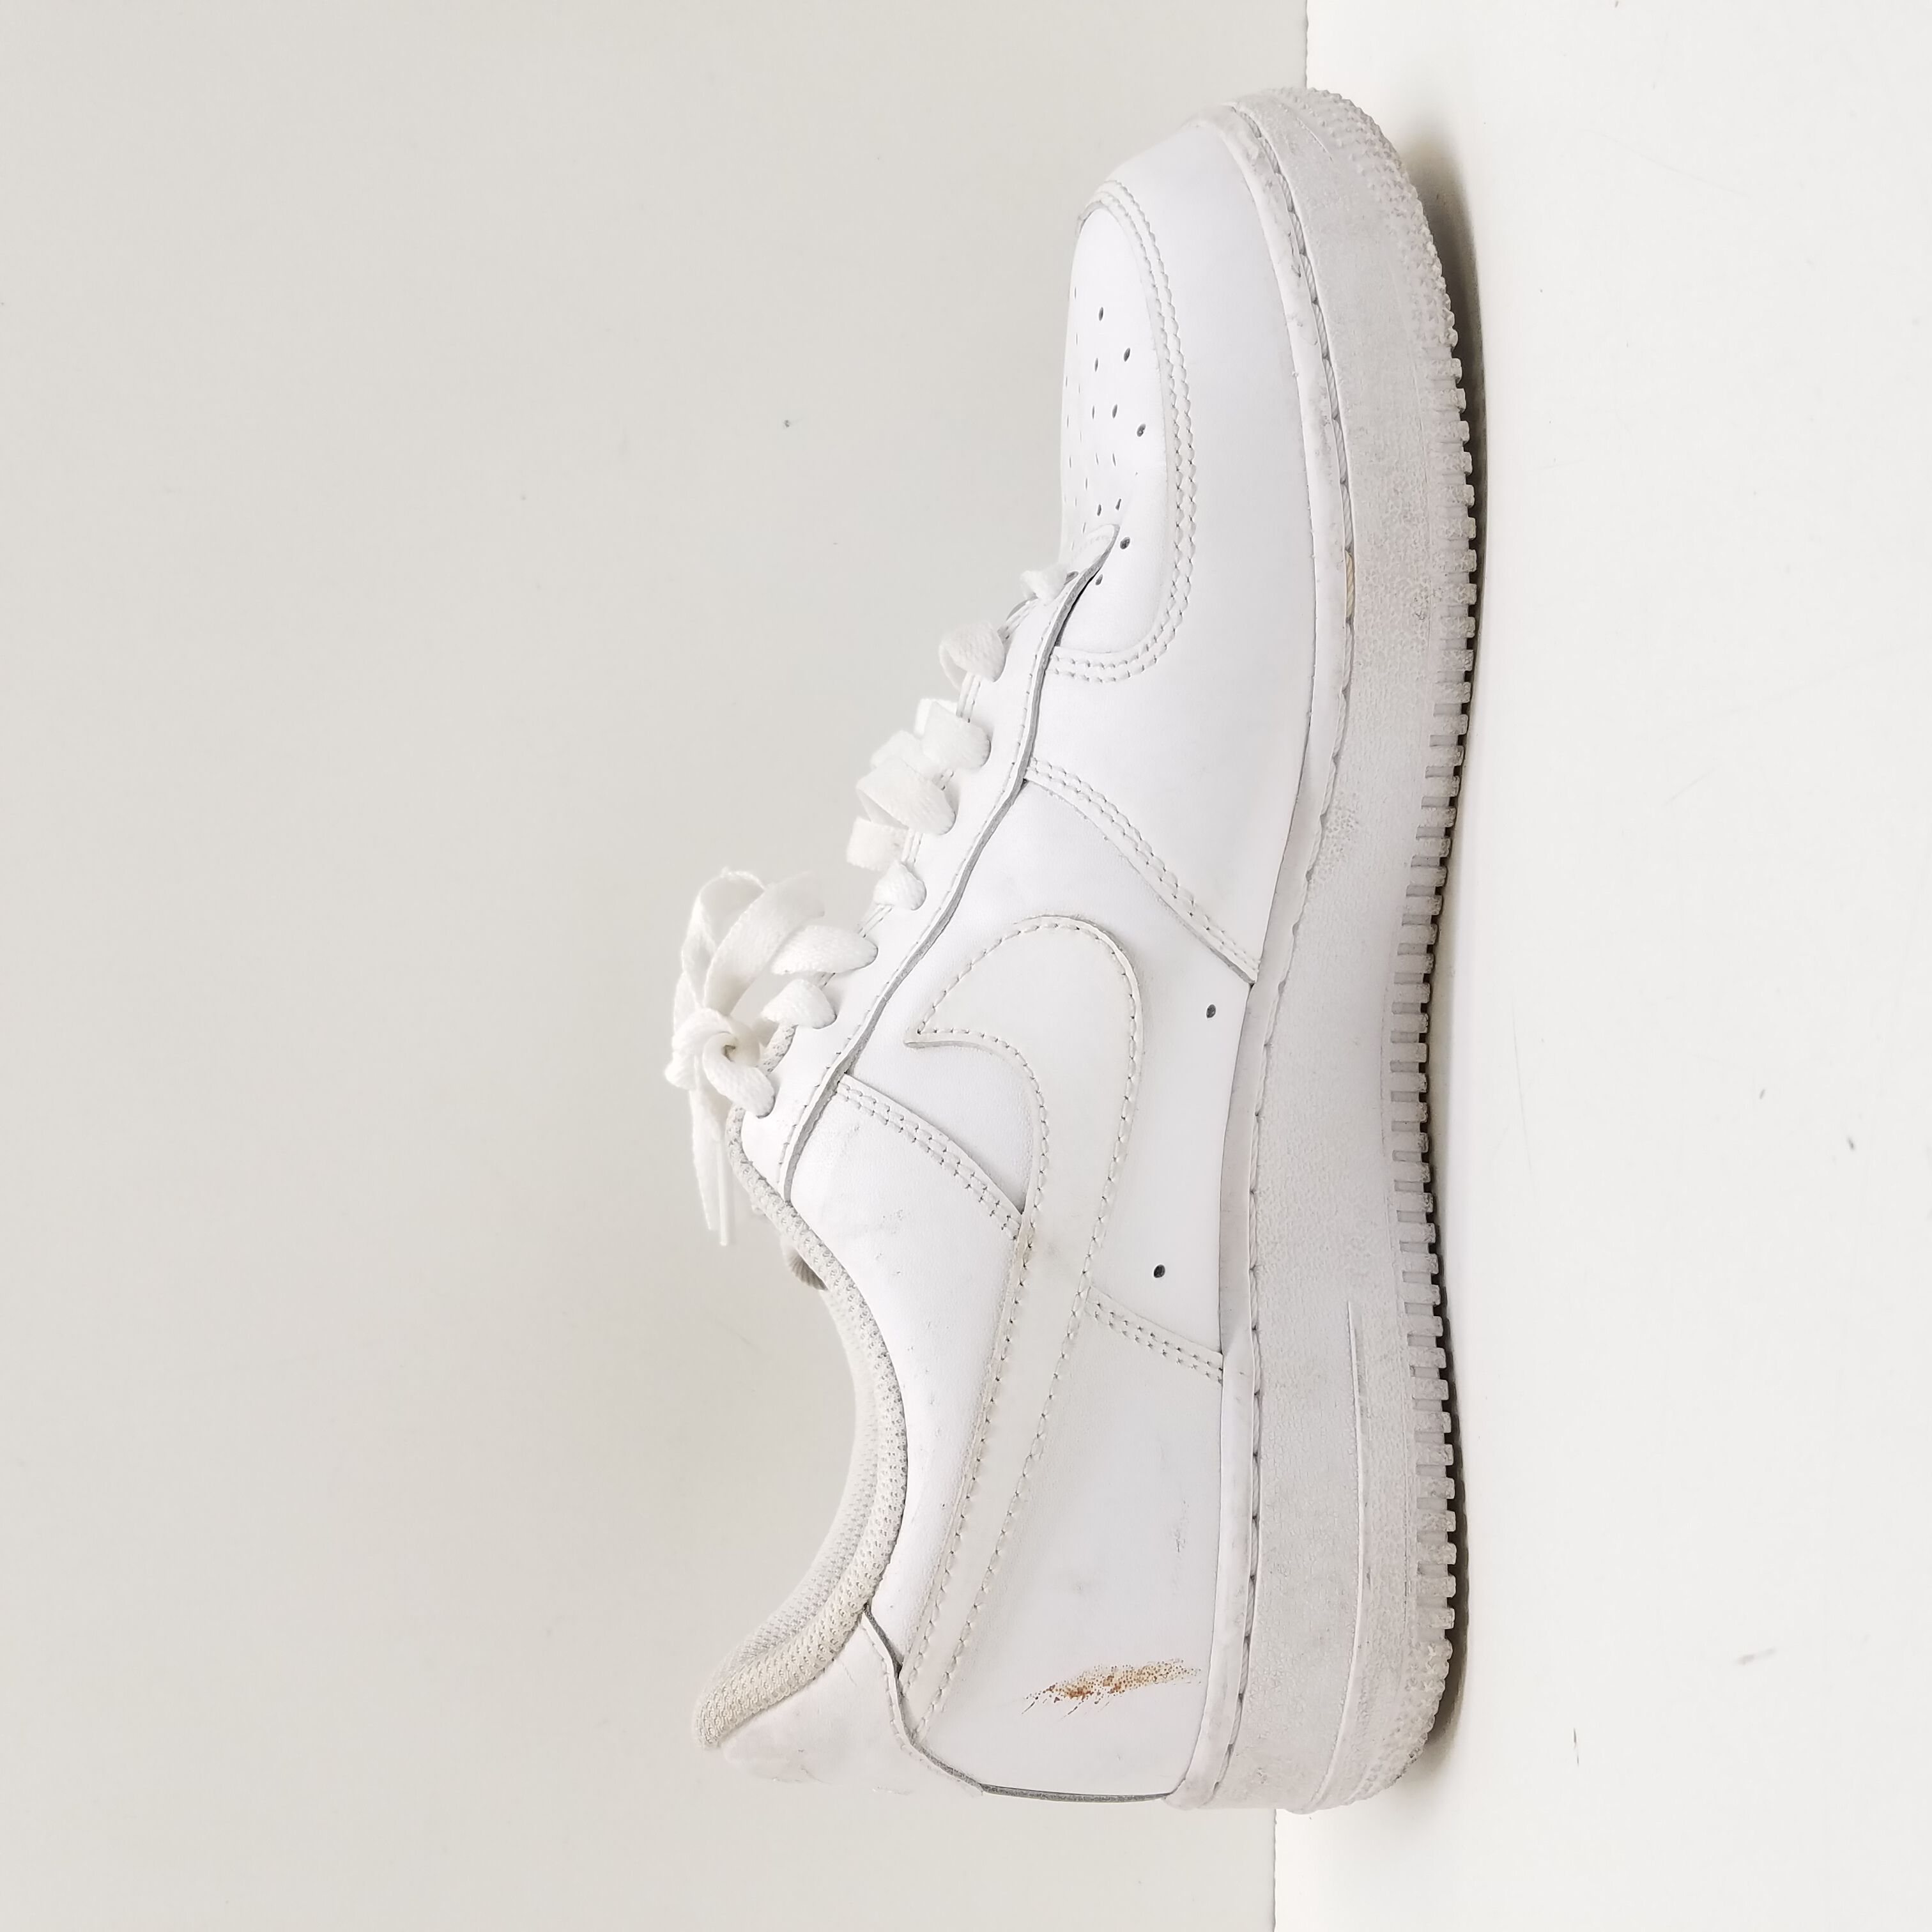 white air force 1 mens size 8.5